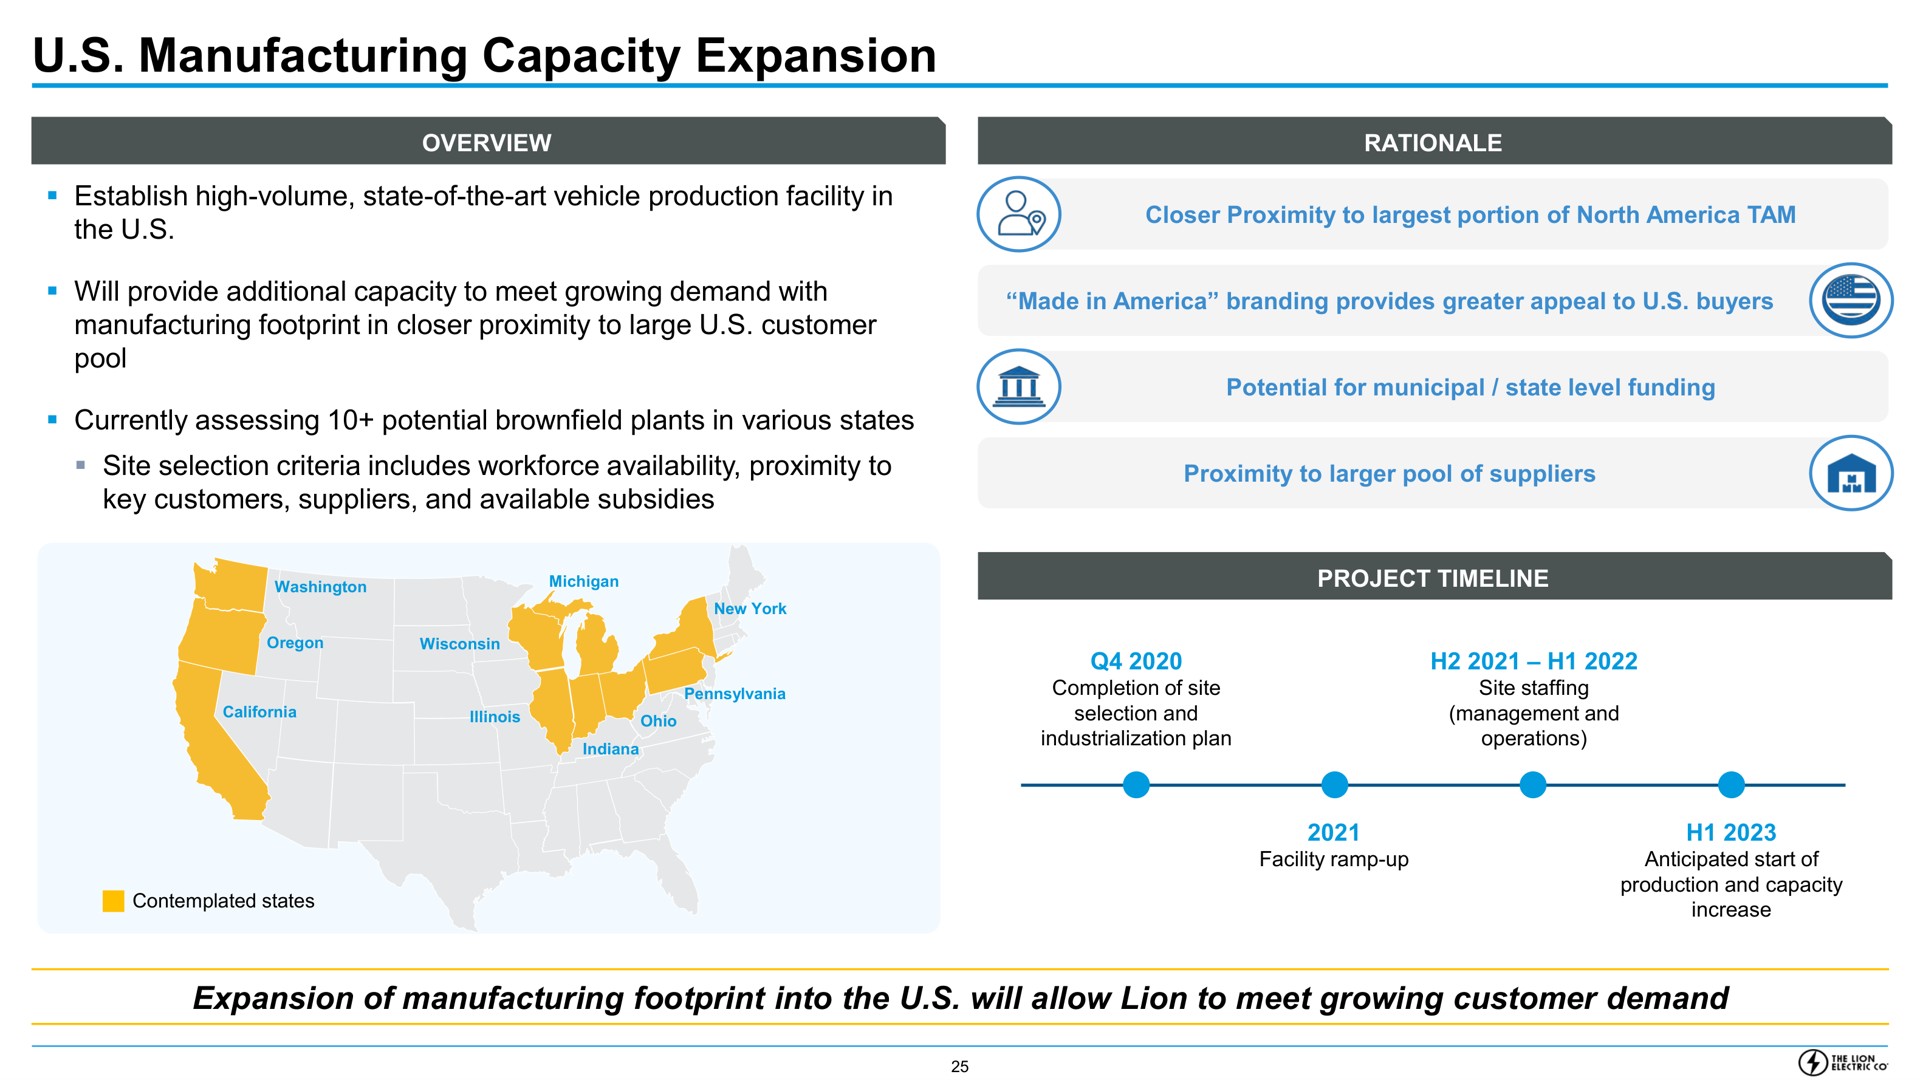 manufacturing capacity expansion will provide additional to meet growing demand with lade in branding provides greater appeal to buyers | Lion Electric